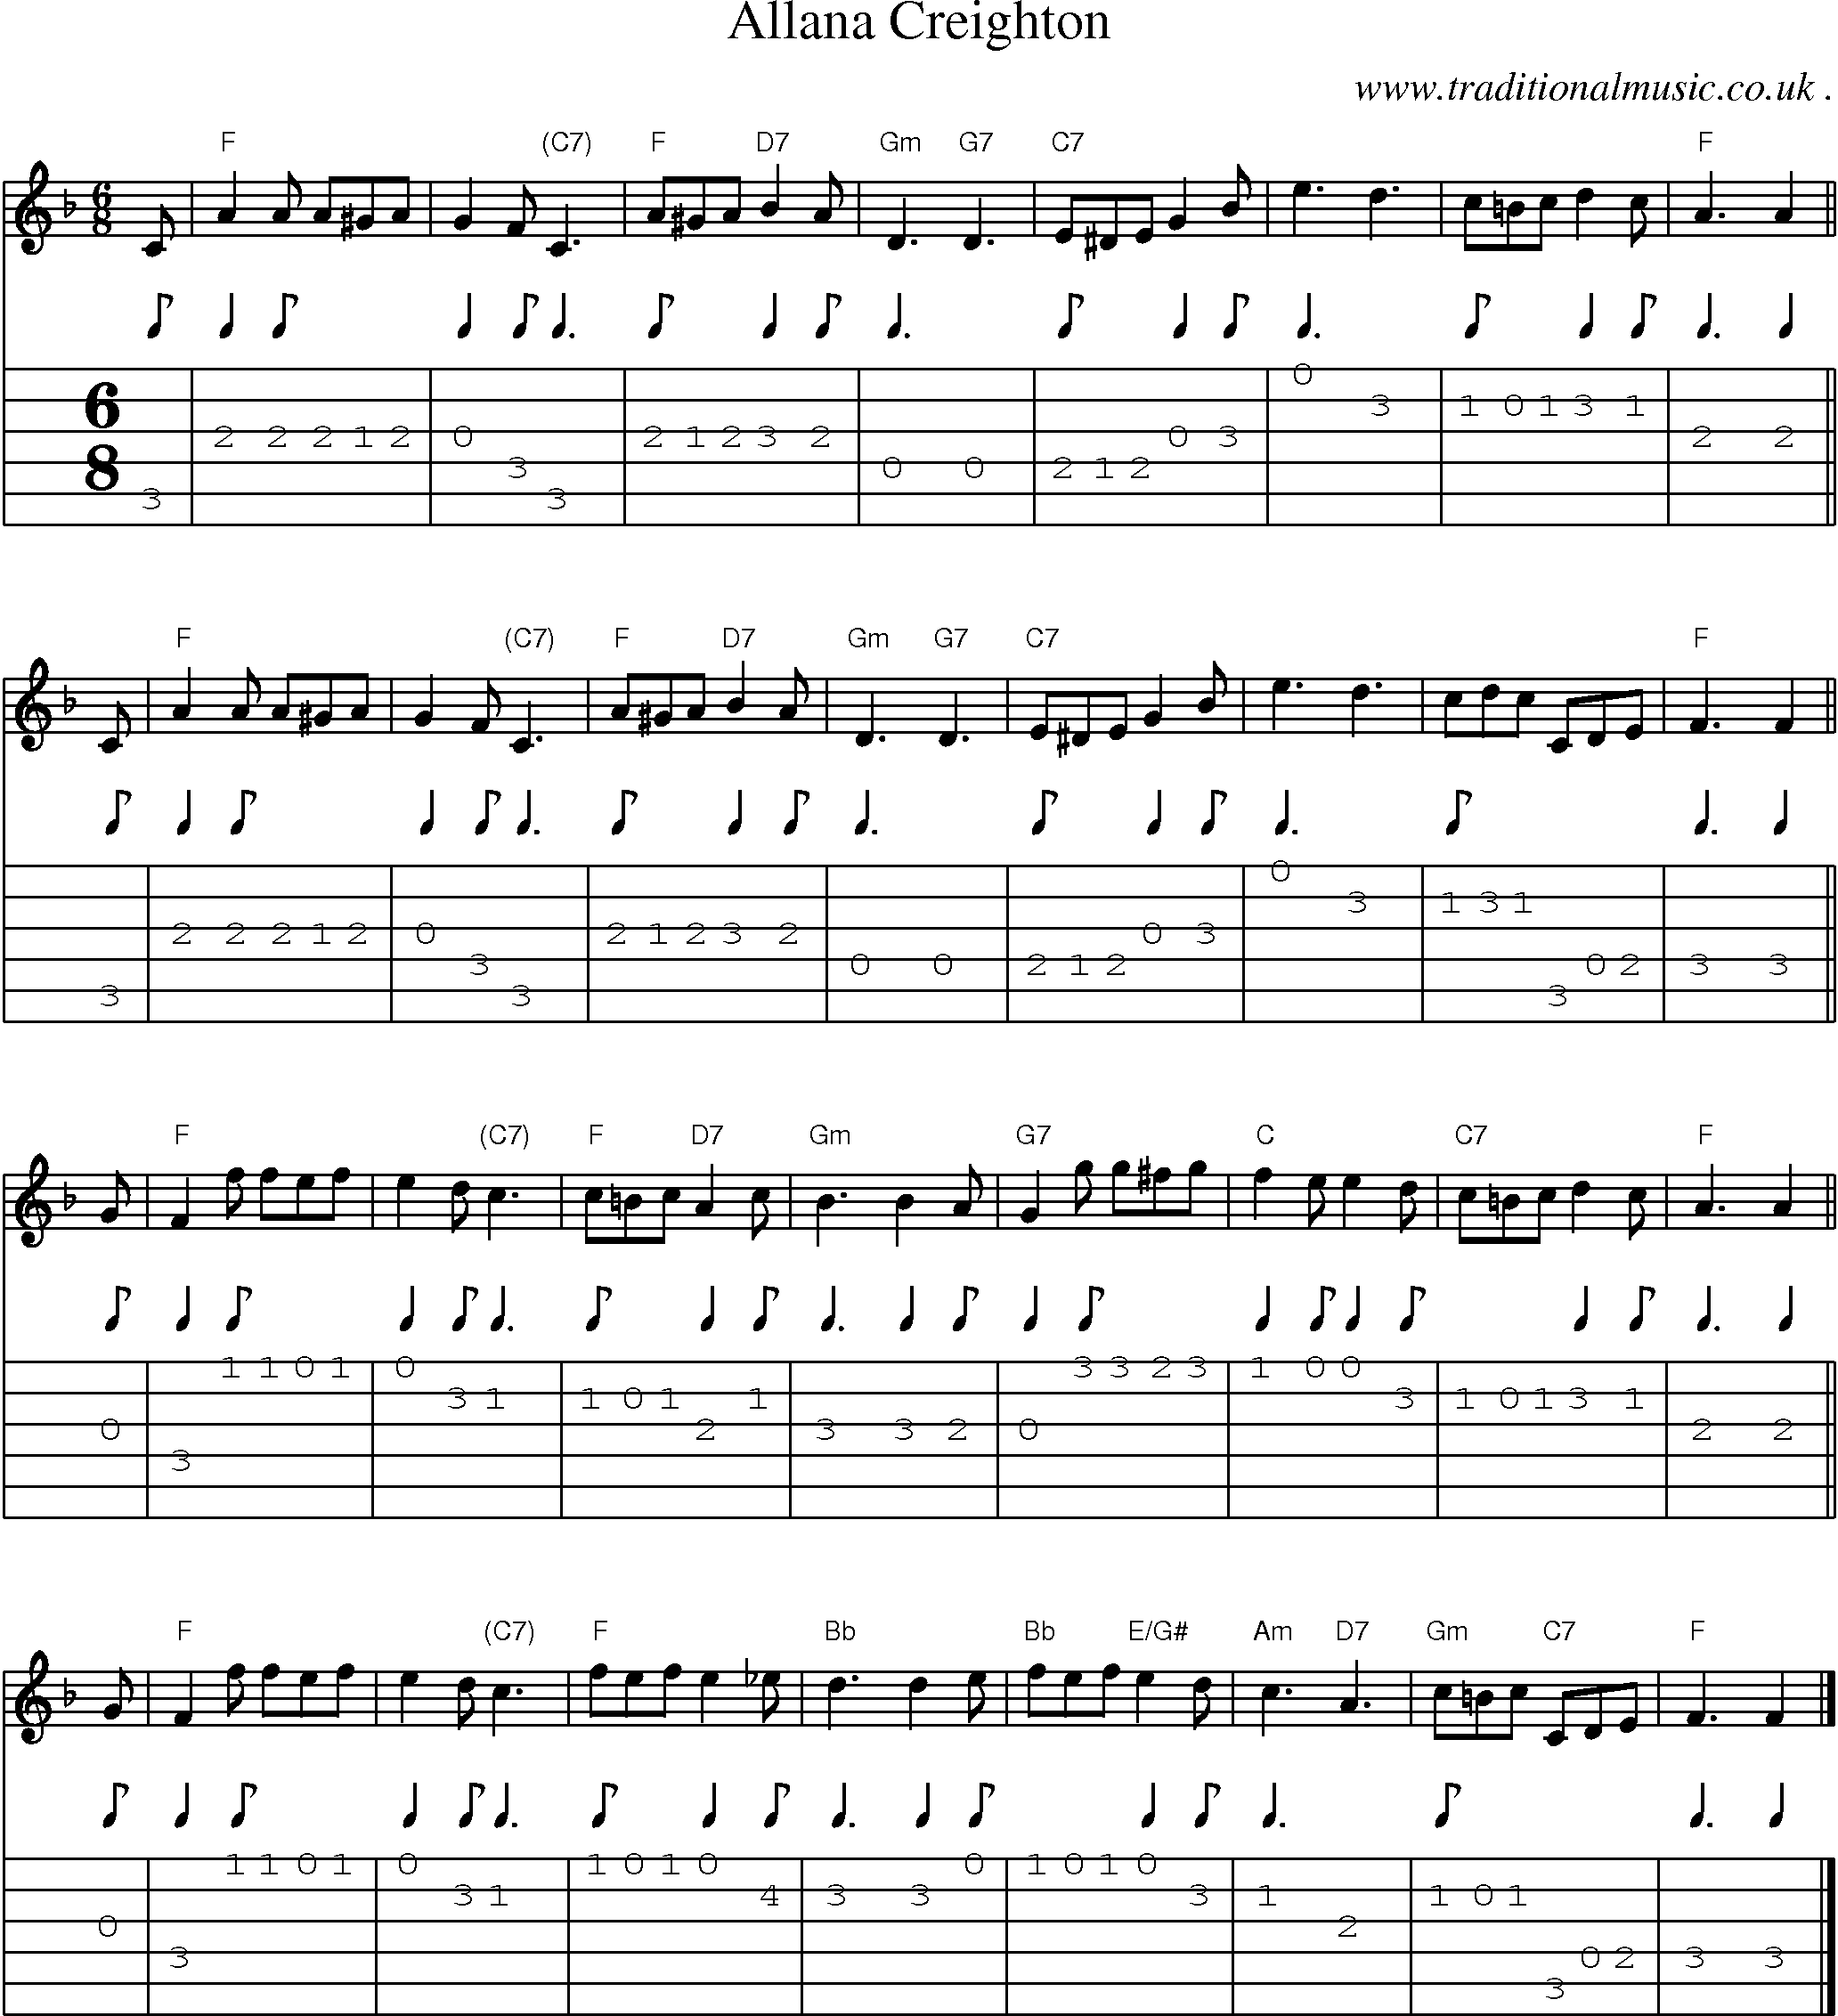 Sheet-music  score, Chords and Guitar Tabs for Allana Creighton